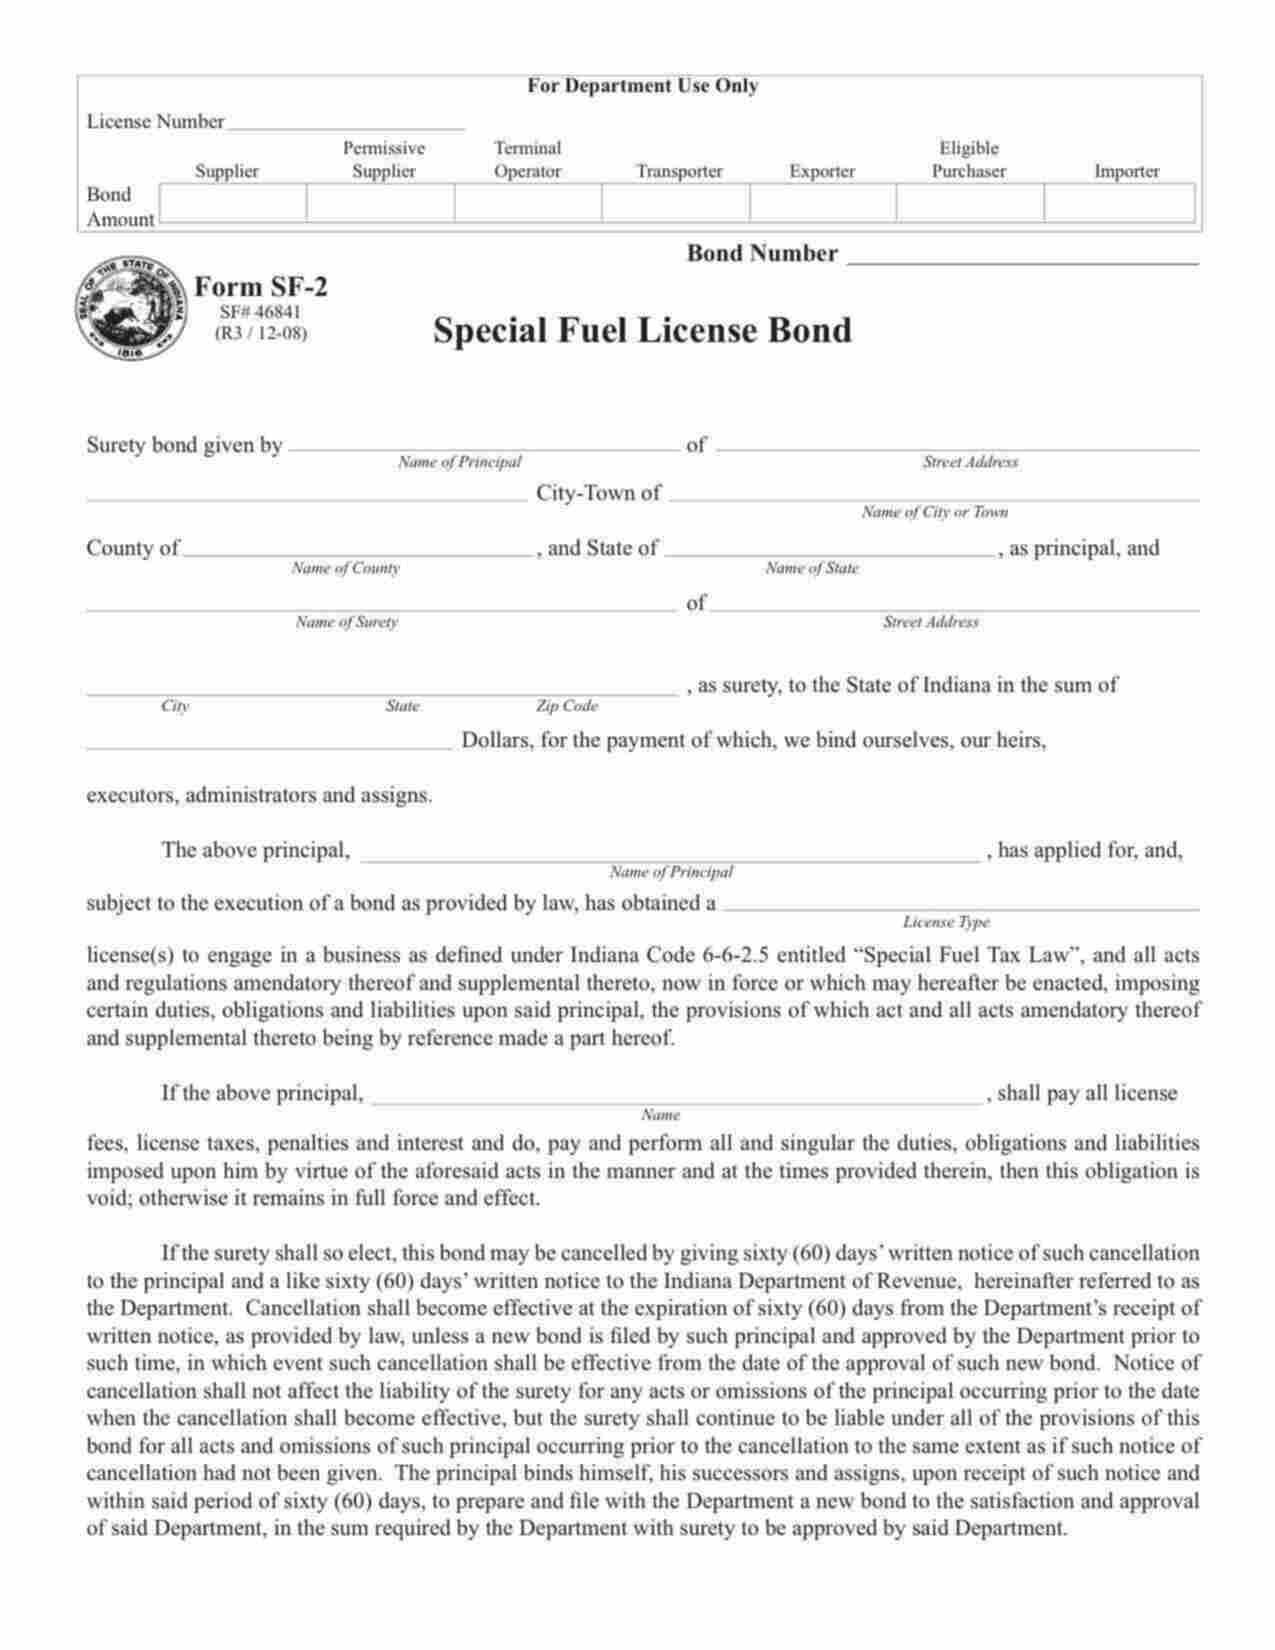 Indiana Special Fuel License - Eligible Purchaser Bond Form